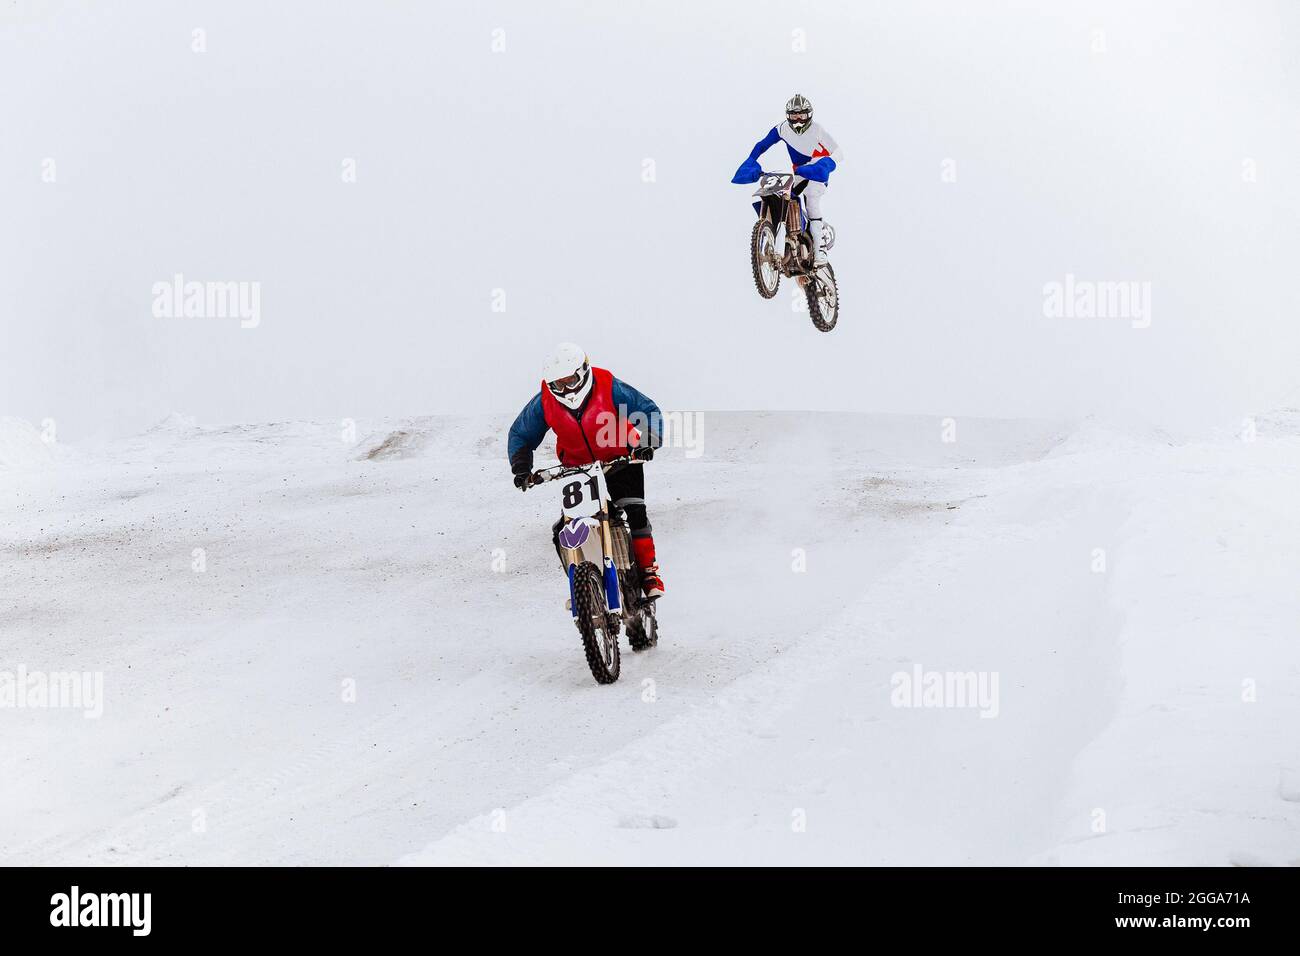 two motorcyclists riding winter enduro race on snow Stock Photo